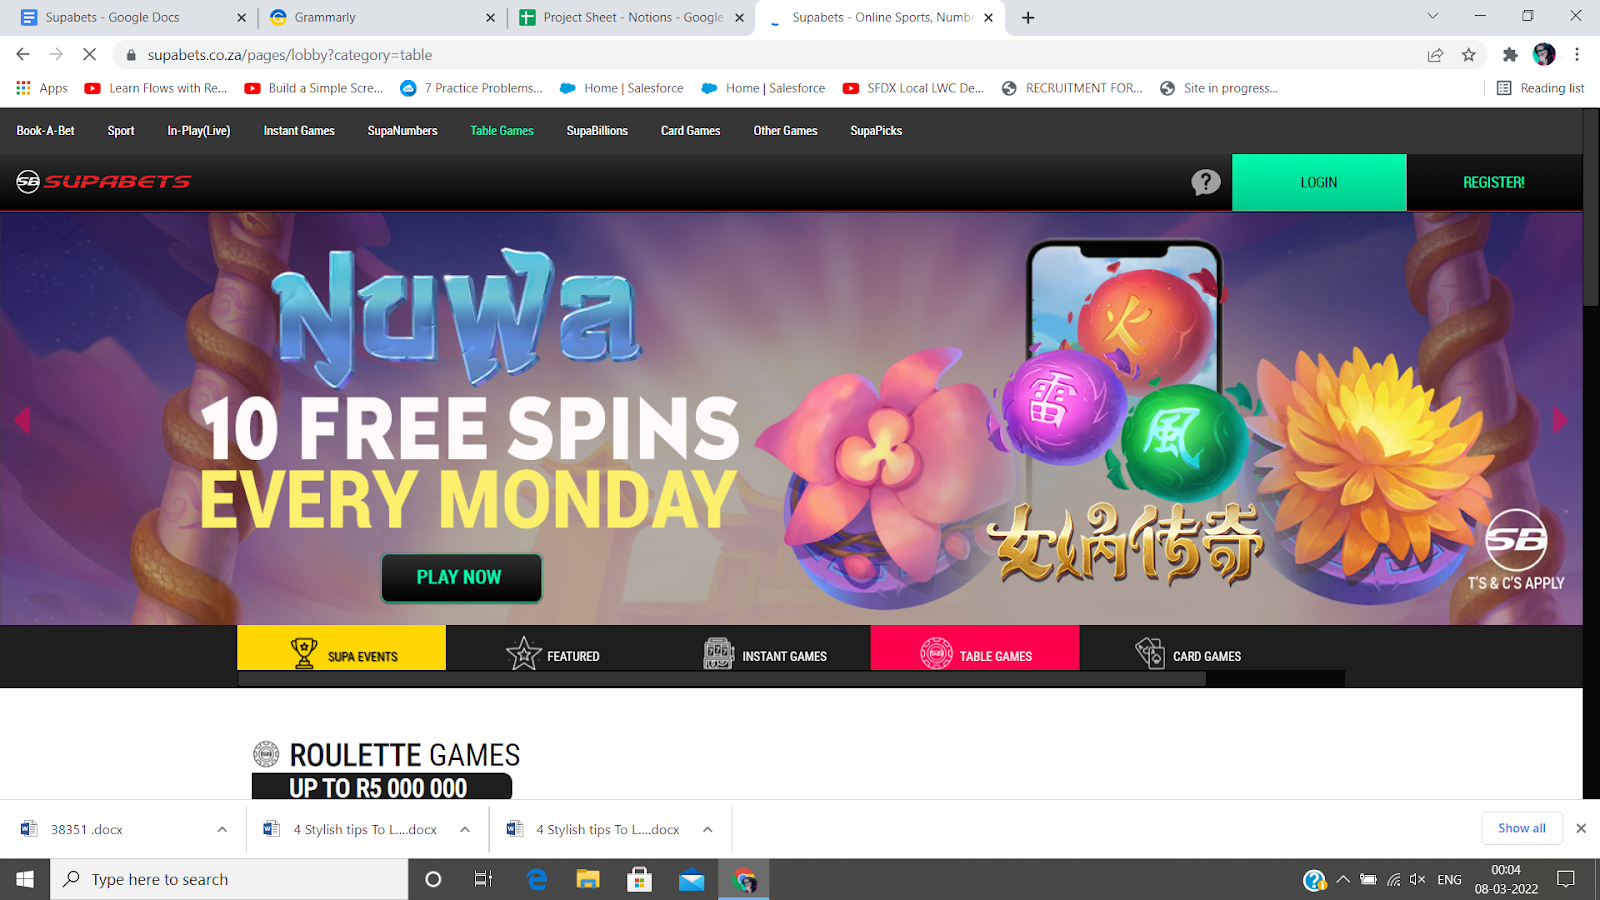 Free spins offered by Supabets site.